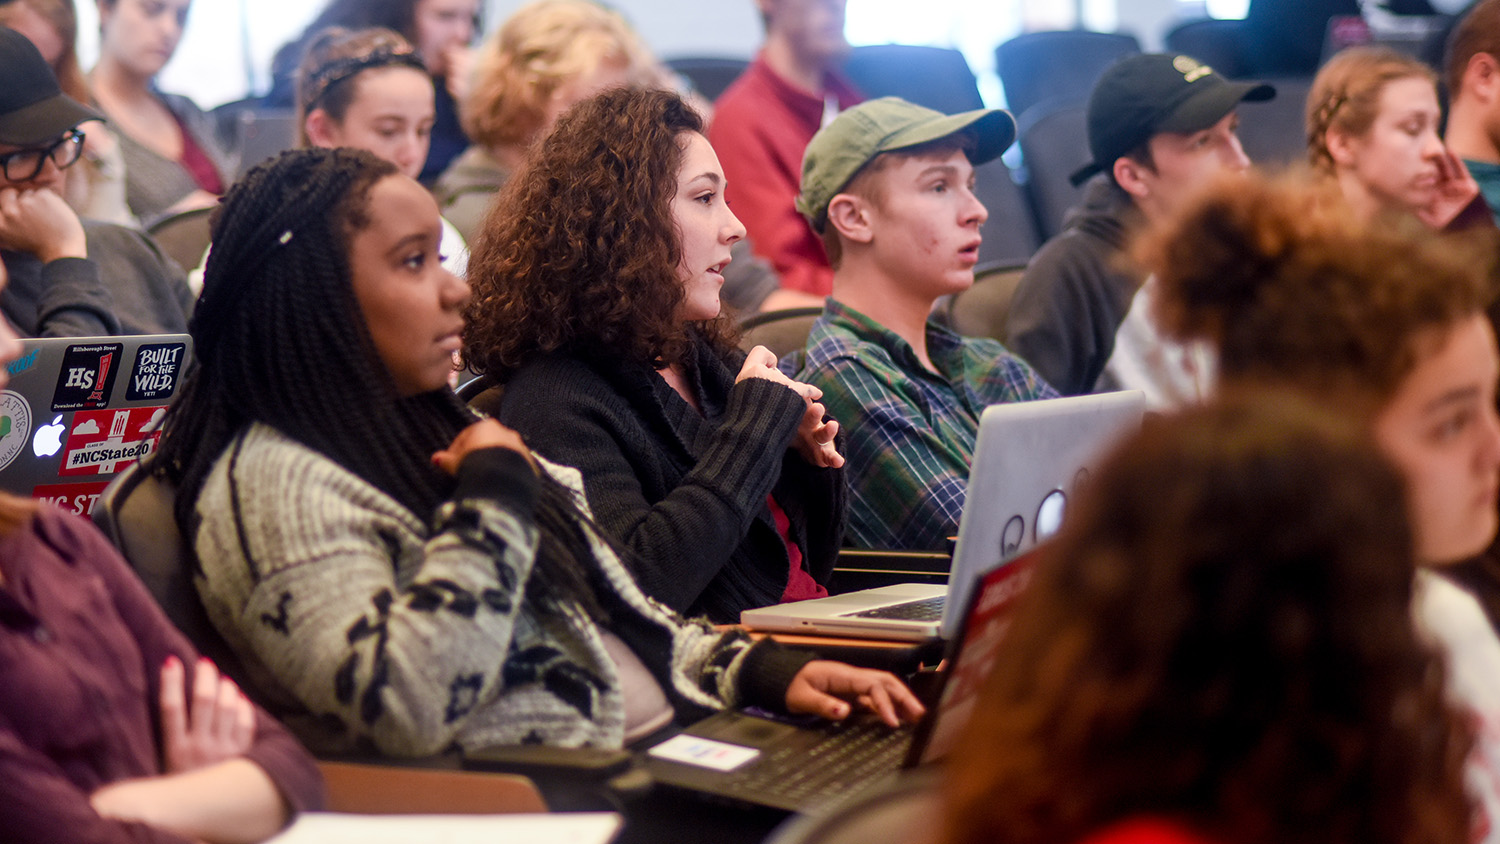 Students listen to a lecture during a college course